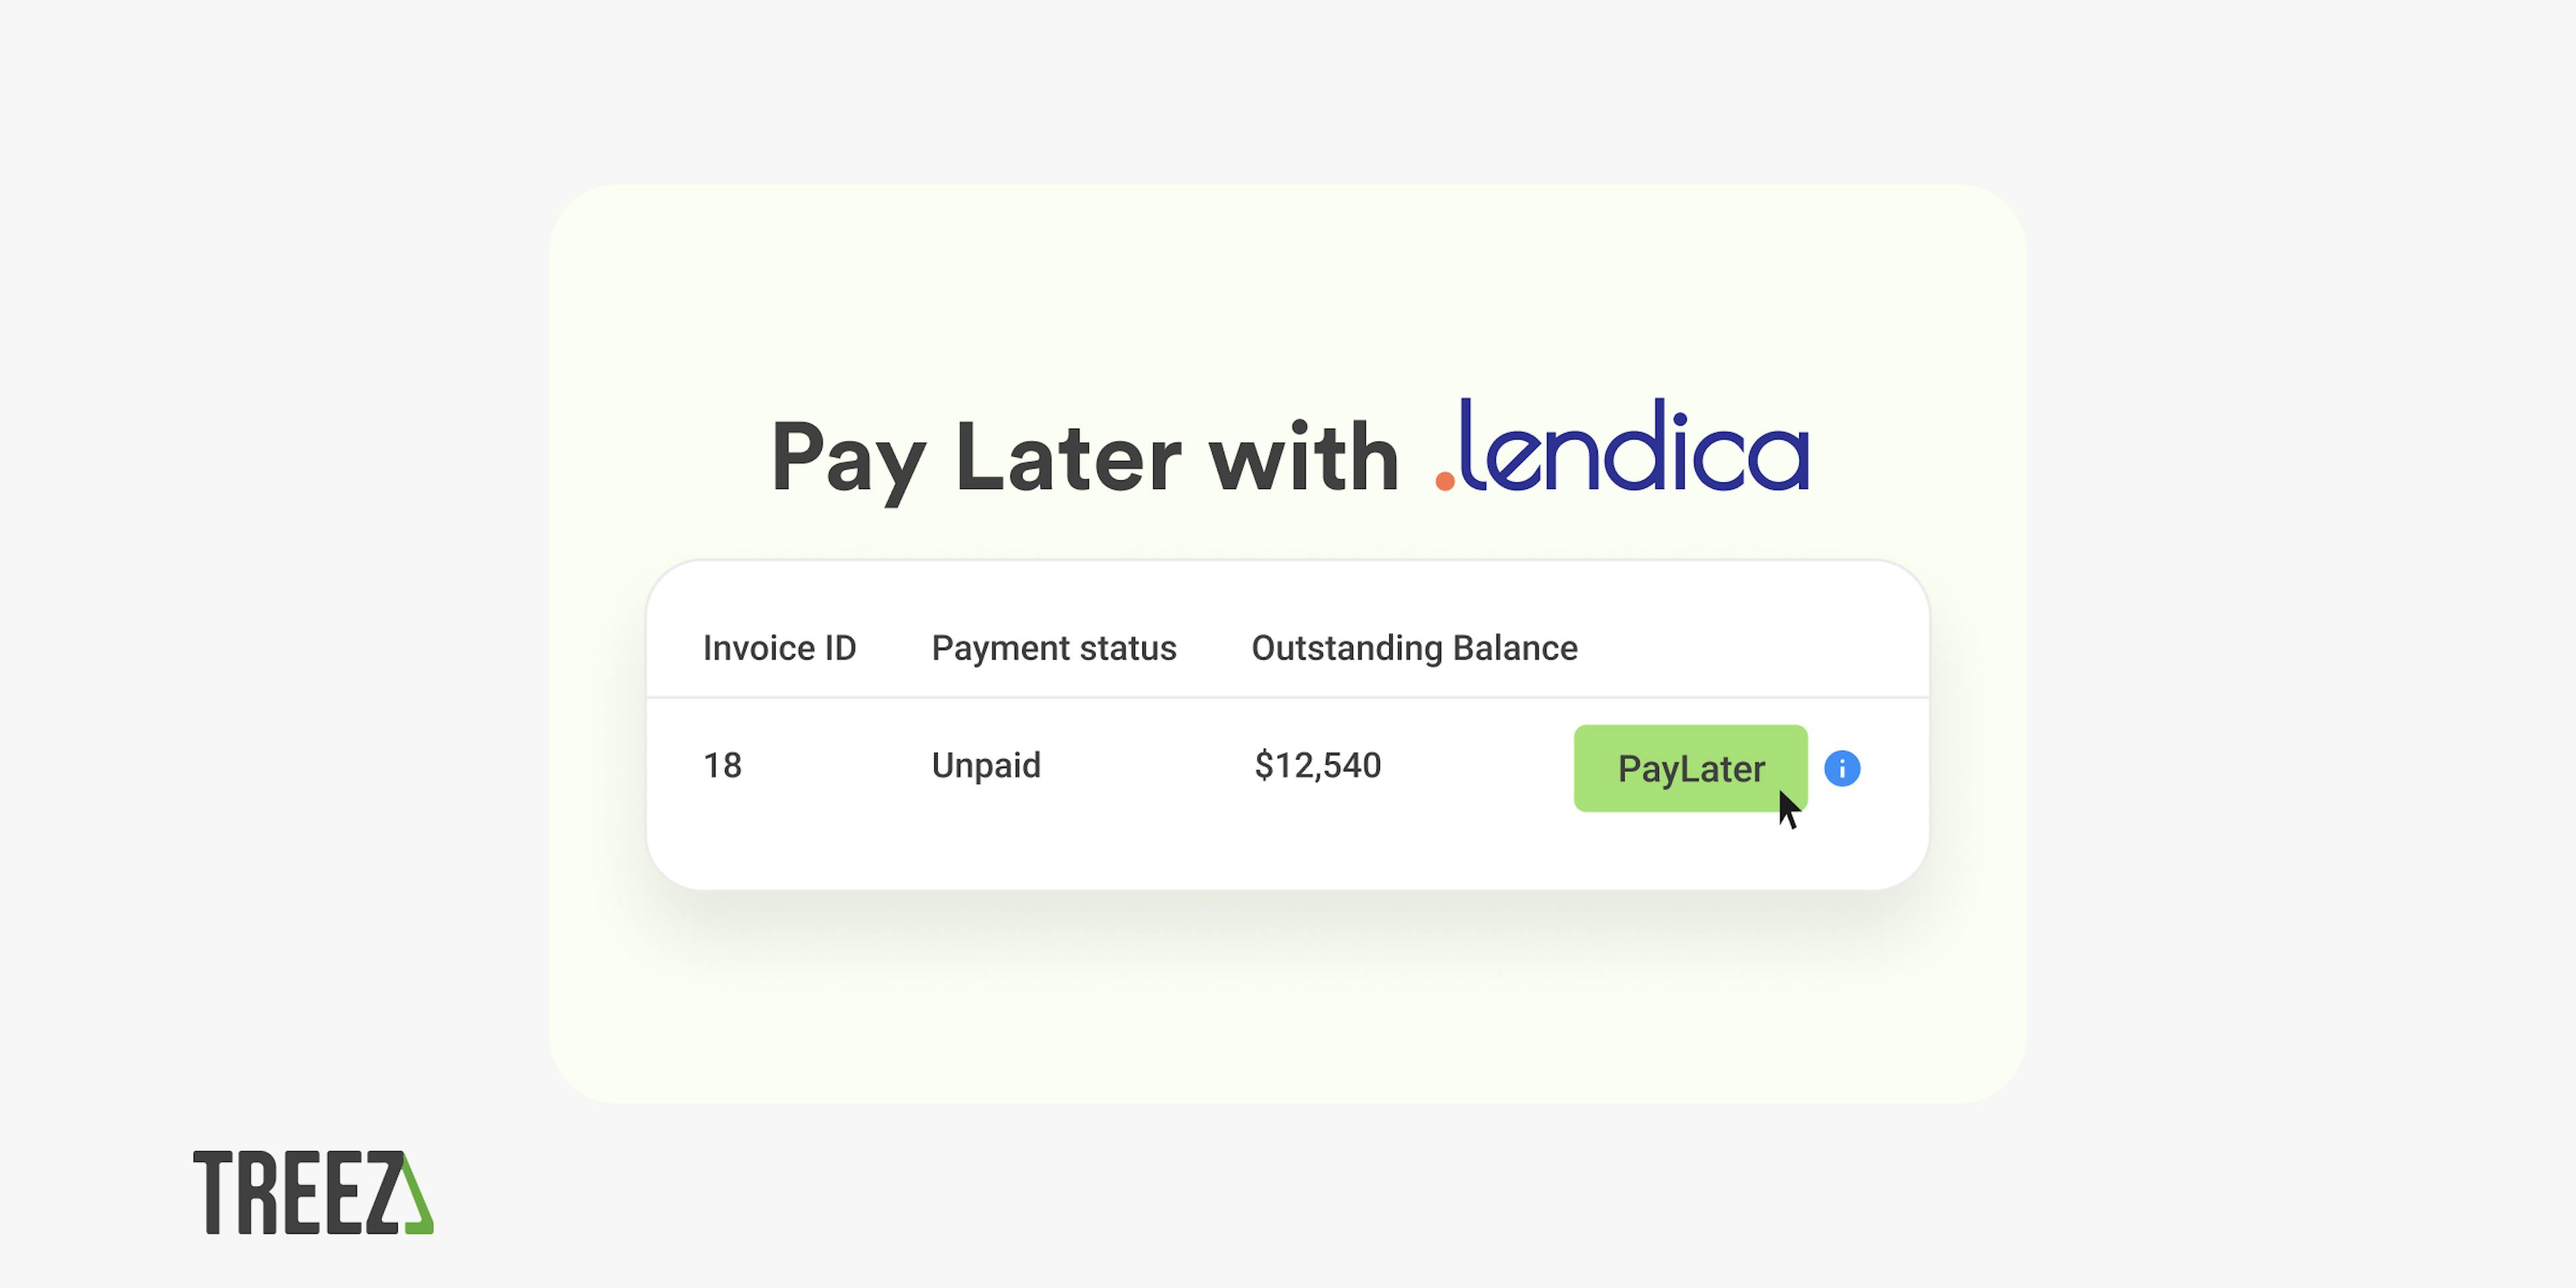 A visual of an unpaid invoice shows an outstanding balance and a PayLater button. Above the Treez logo is a phrase "Pay Later with Lendica"